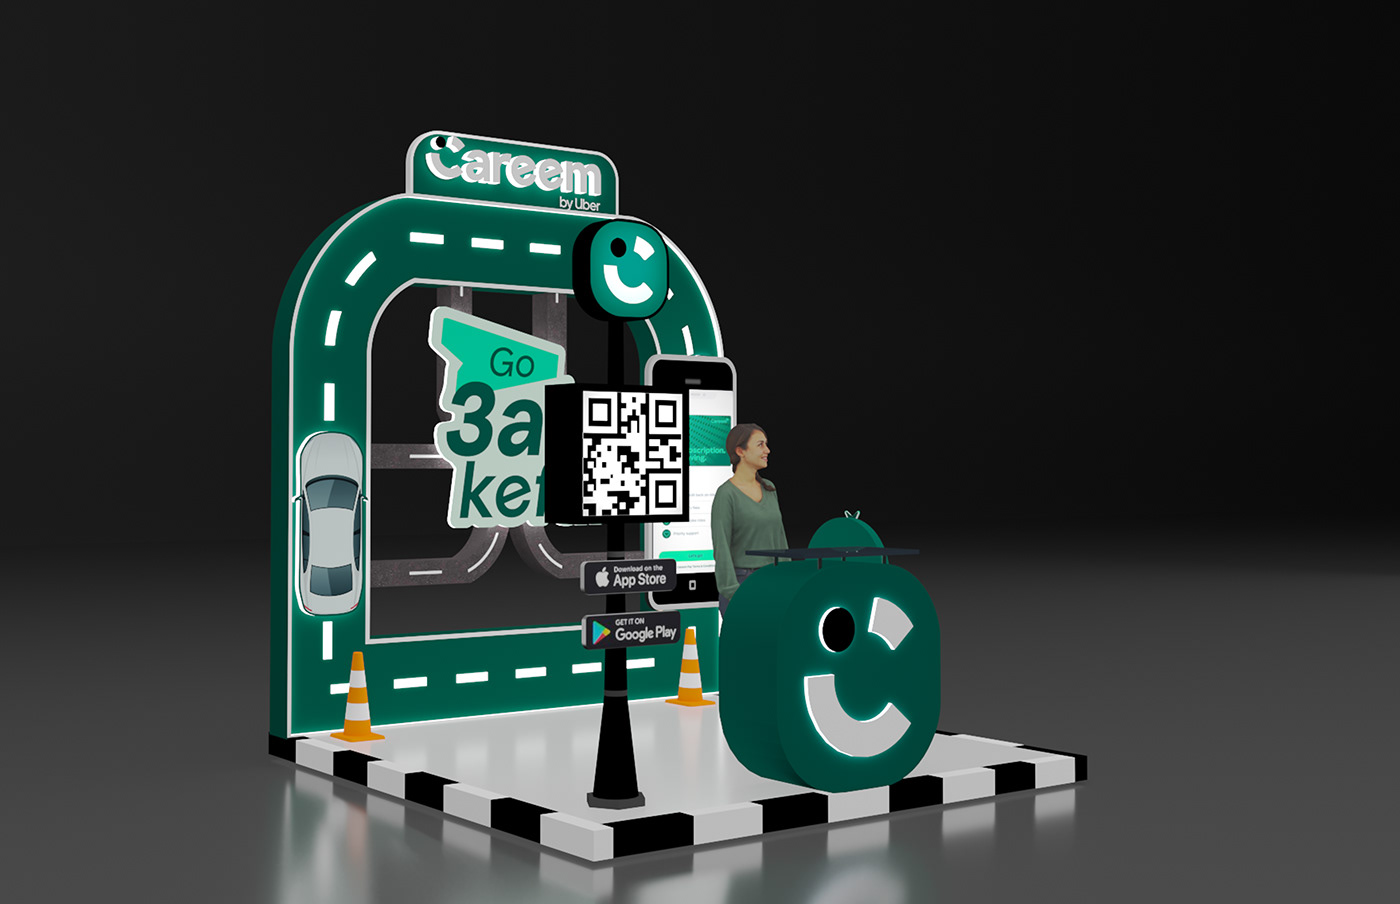 Careem Uber car taxi app booth Exhibition Design  Stand 3D expo